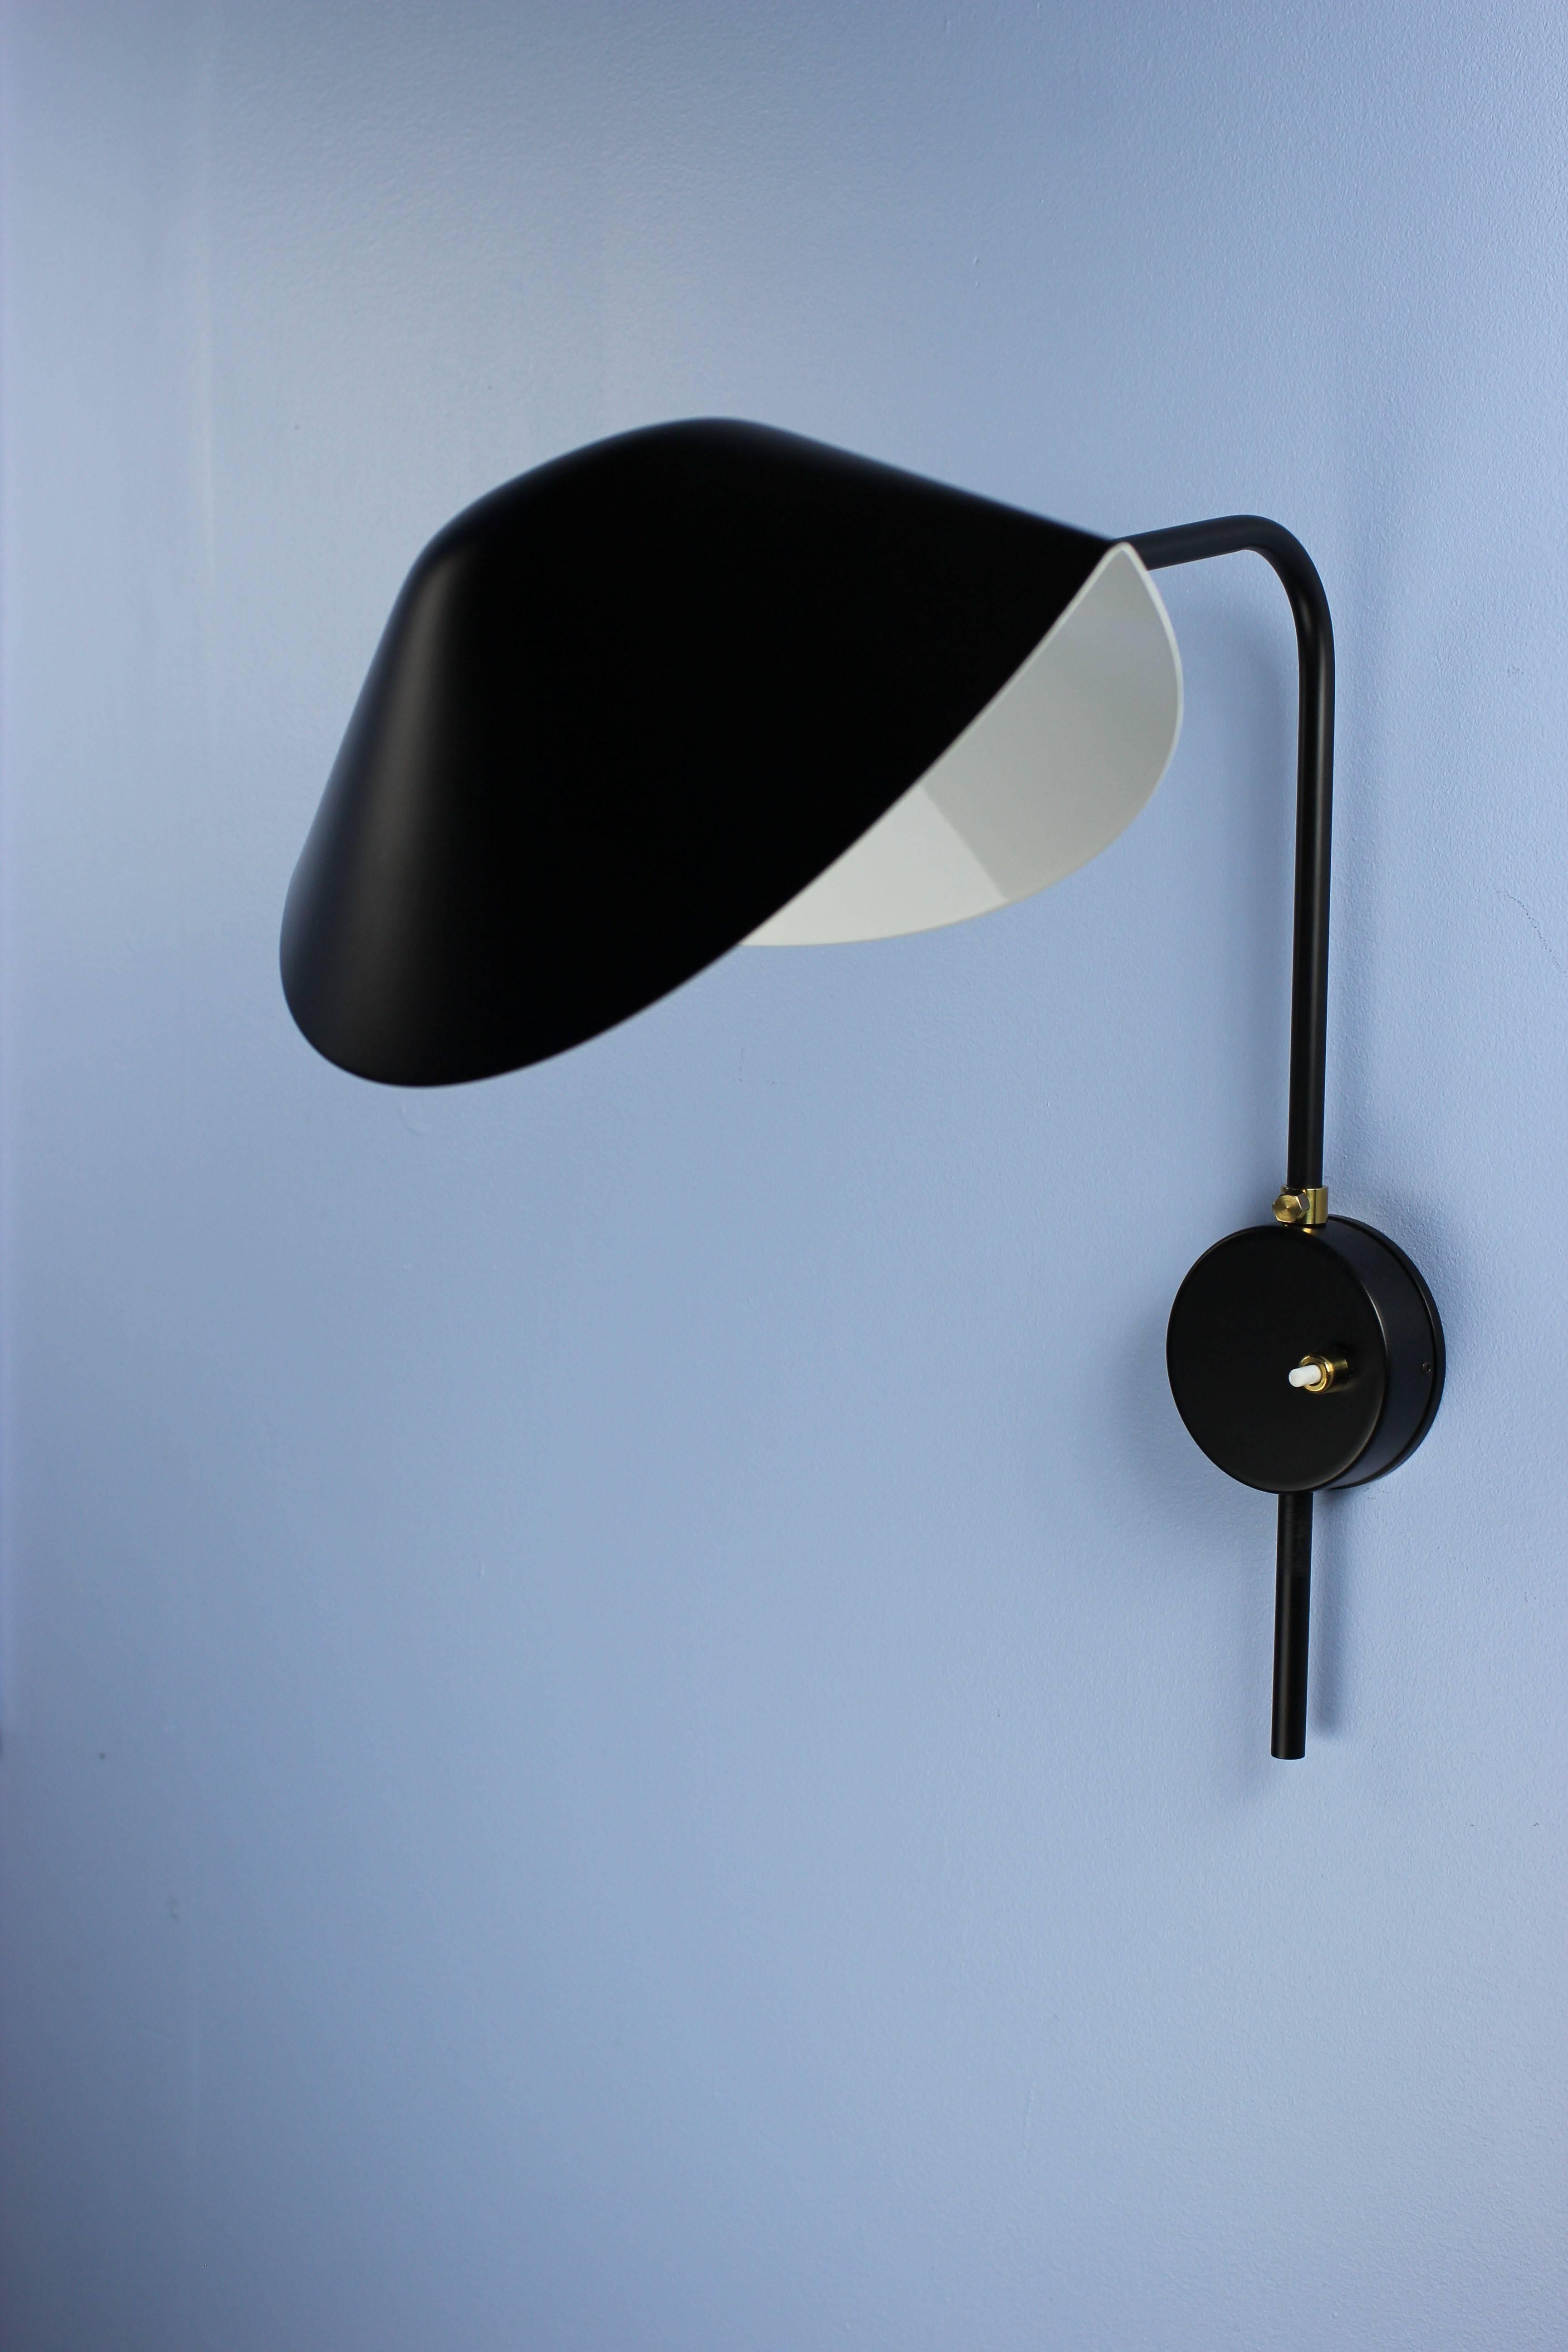 This sconce incorporates the 